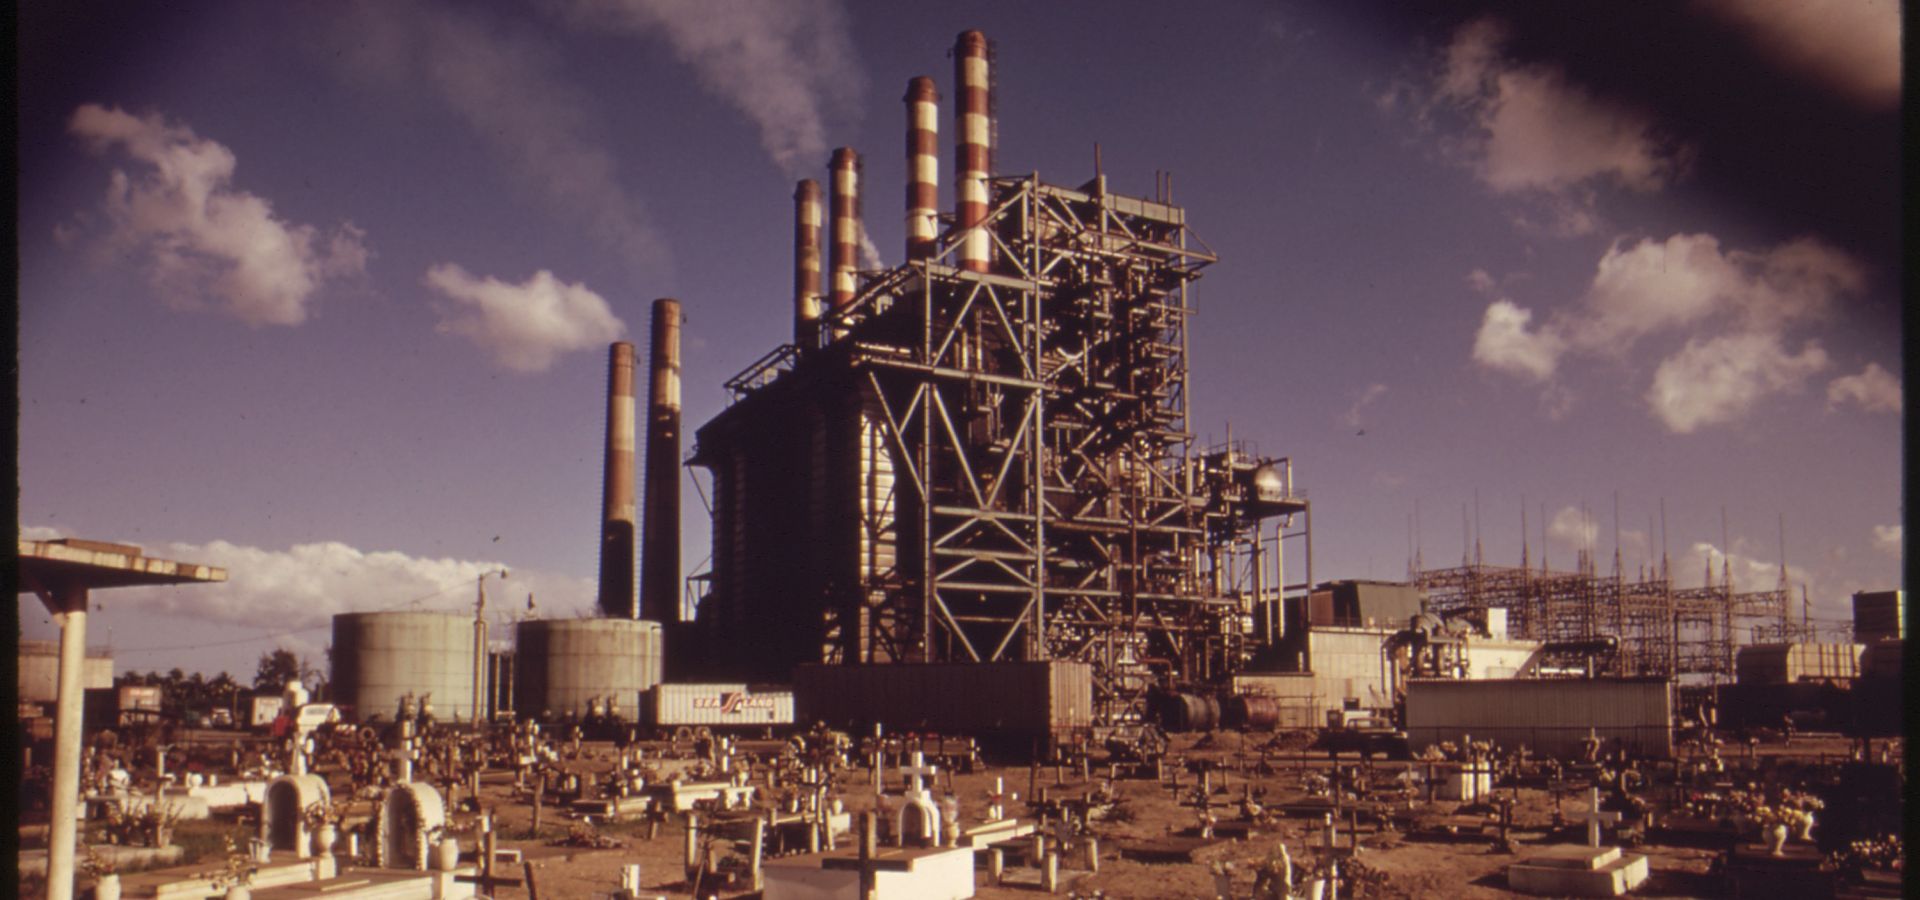 an old picture from the 1970s of a Puerto Rican power plant in the middle of a graveyard